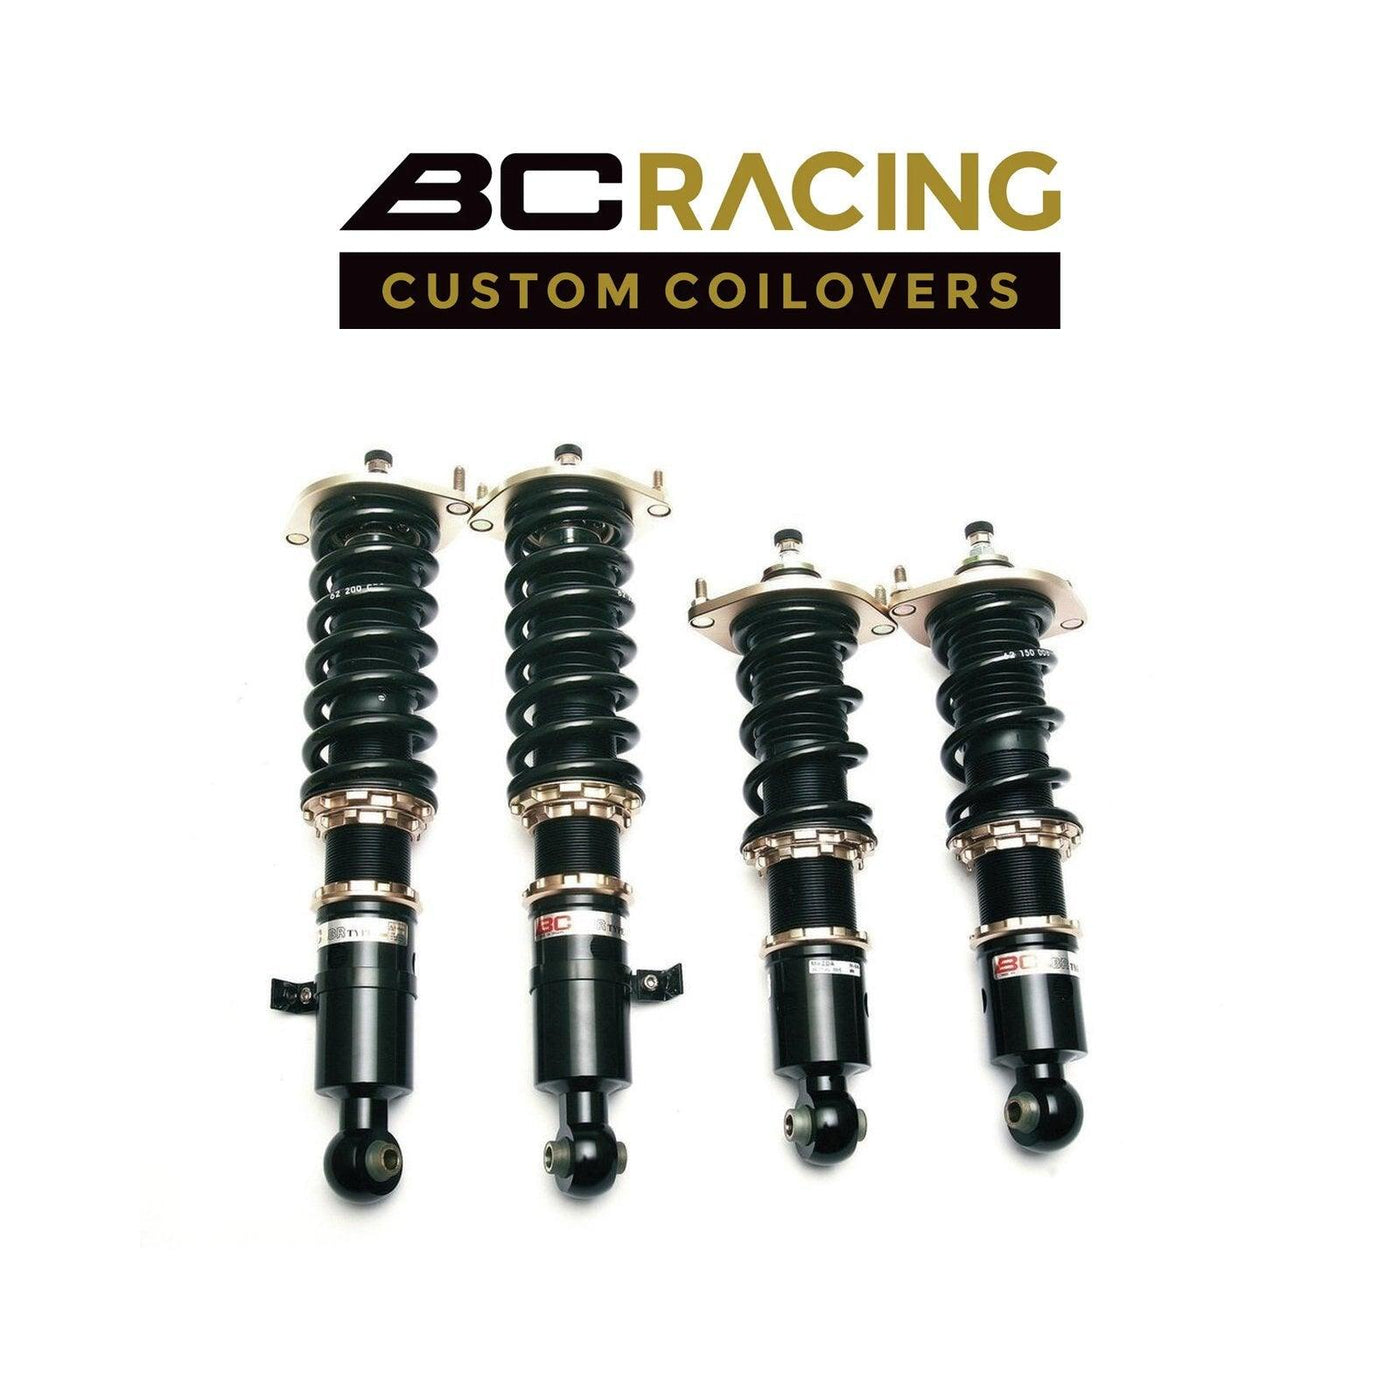 BC Racing Coilovers 2009-2014 HONDA Acura TL FWD/AWD - Attacking the Clock Racing